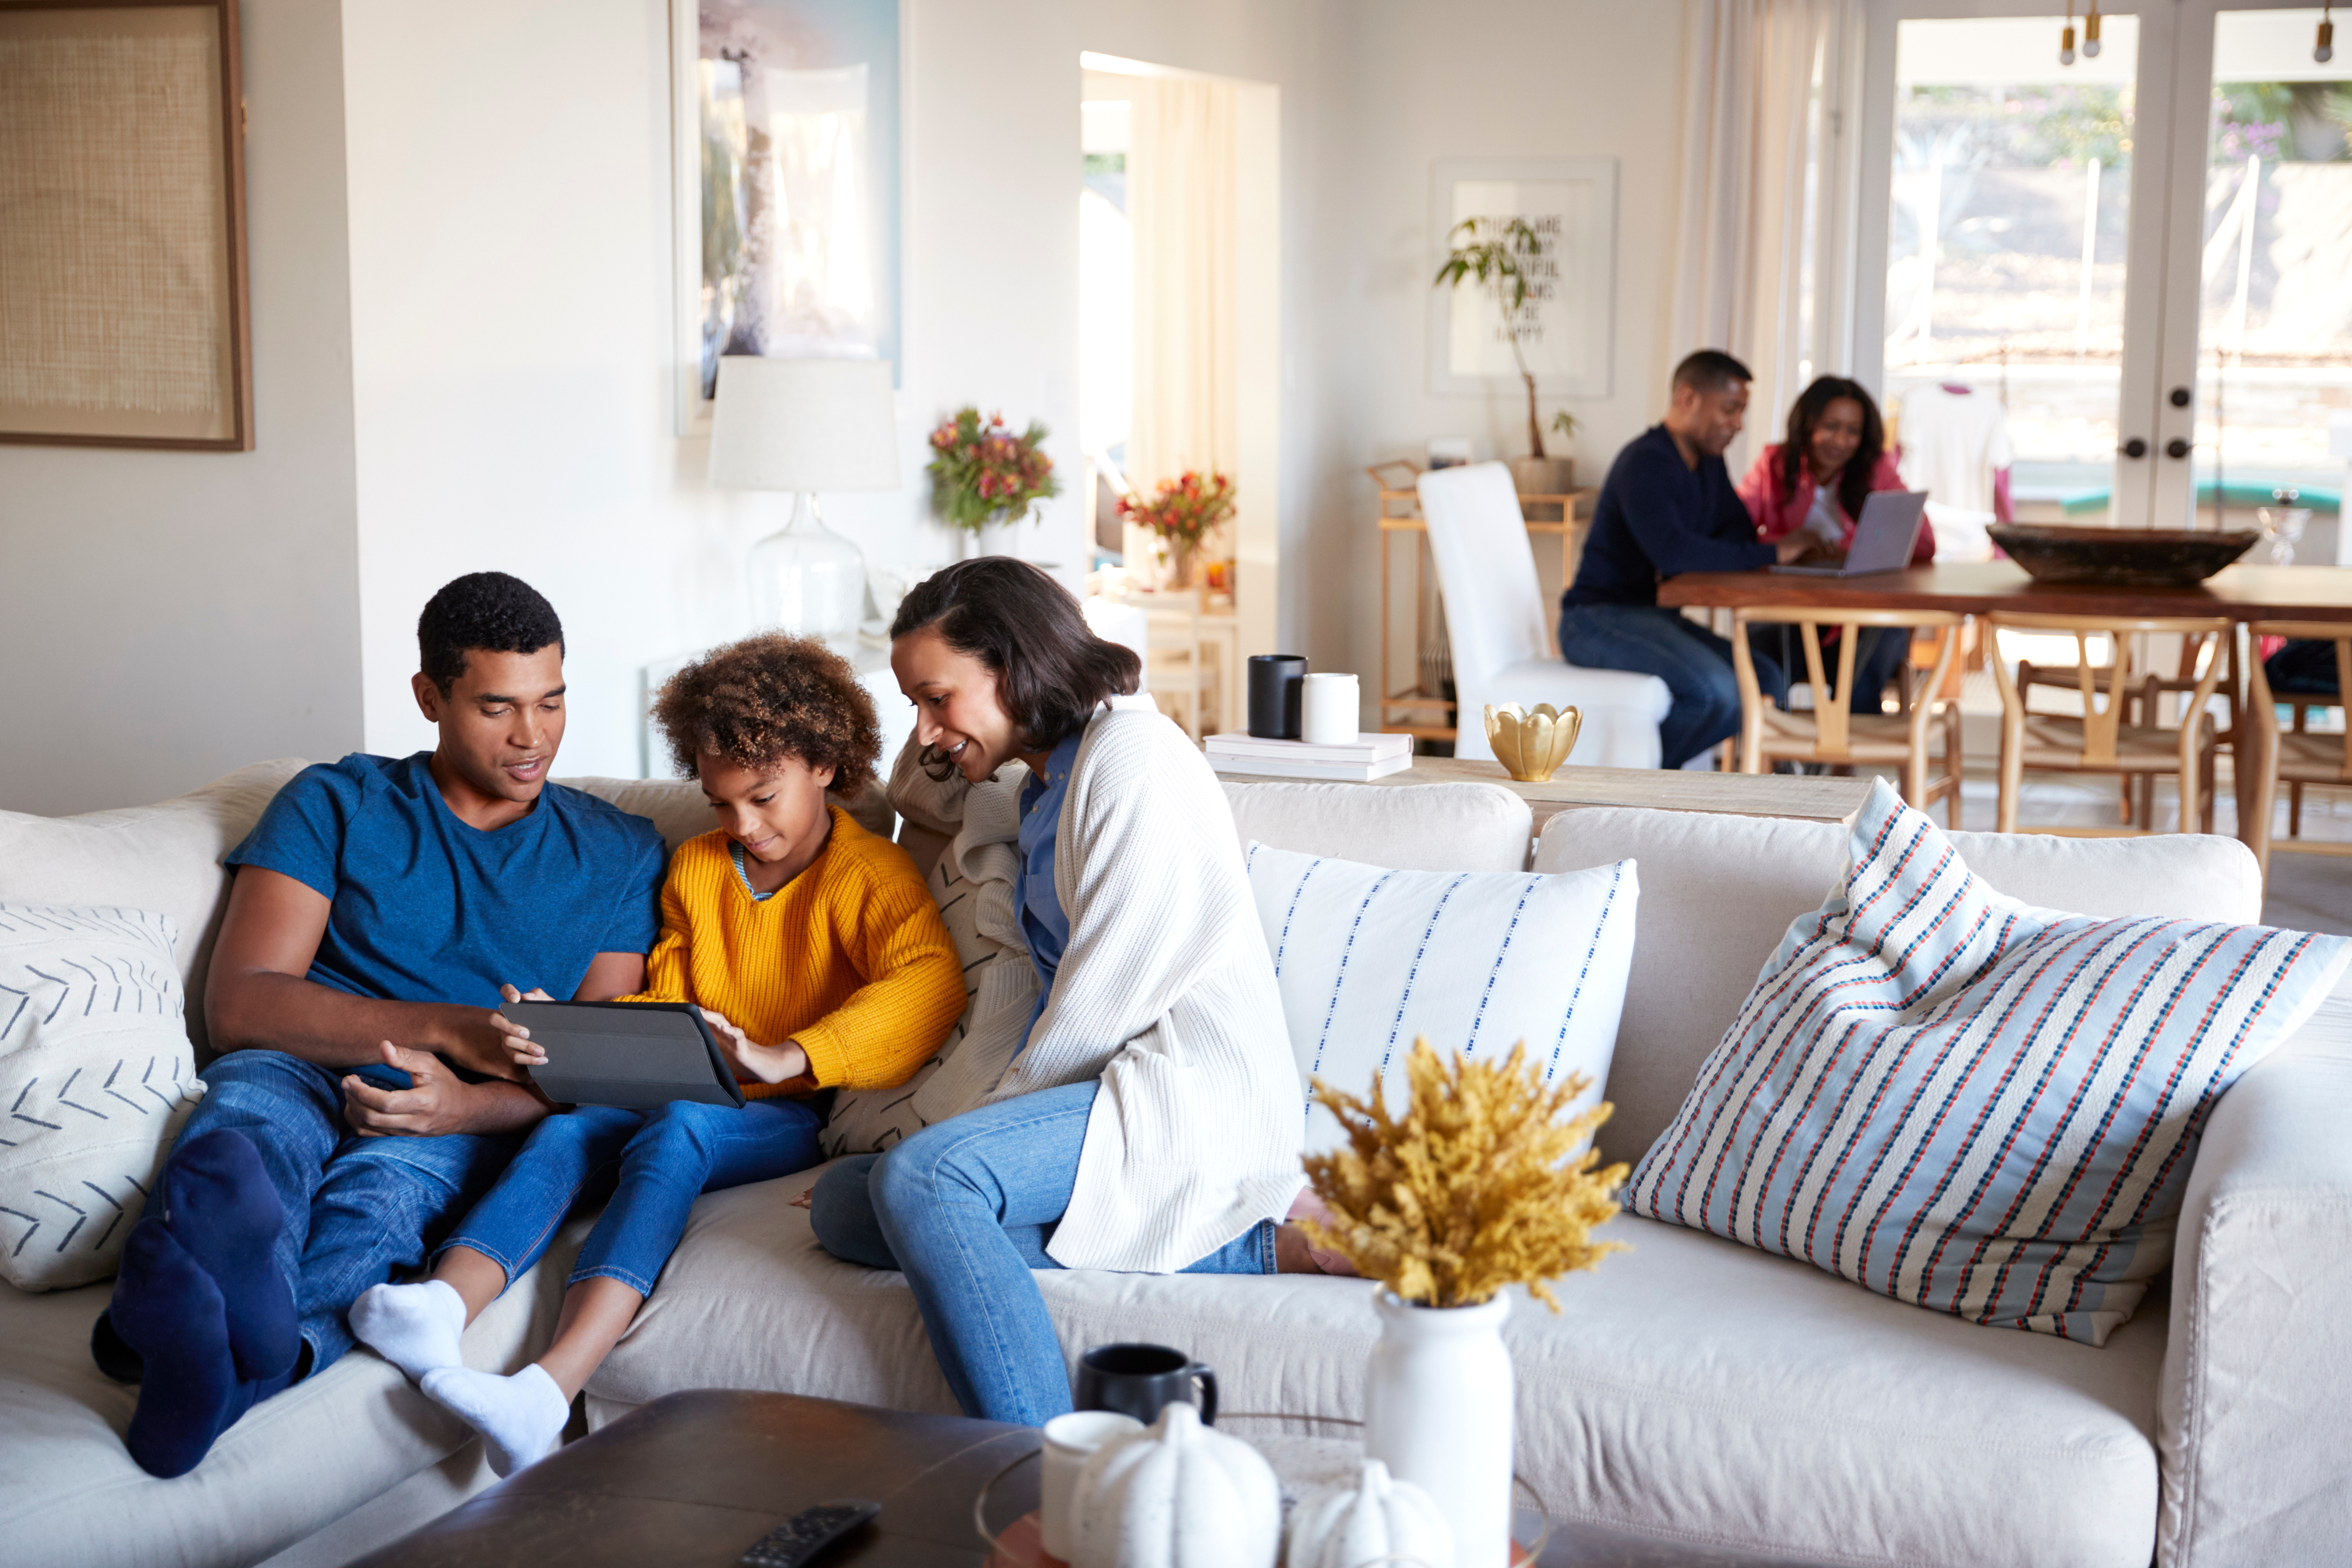 Young parents sitting on sofa with their daughter using tablet computer in open plan living room, grandparents sitting at a table in the background